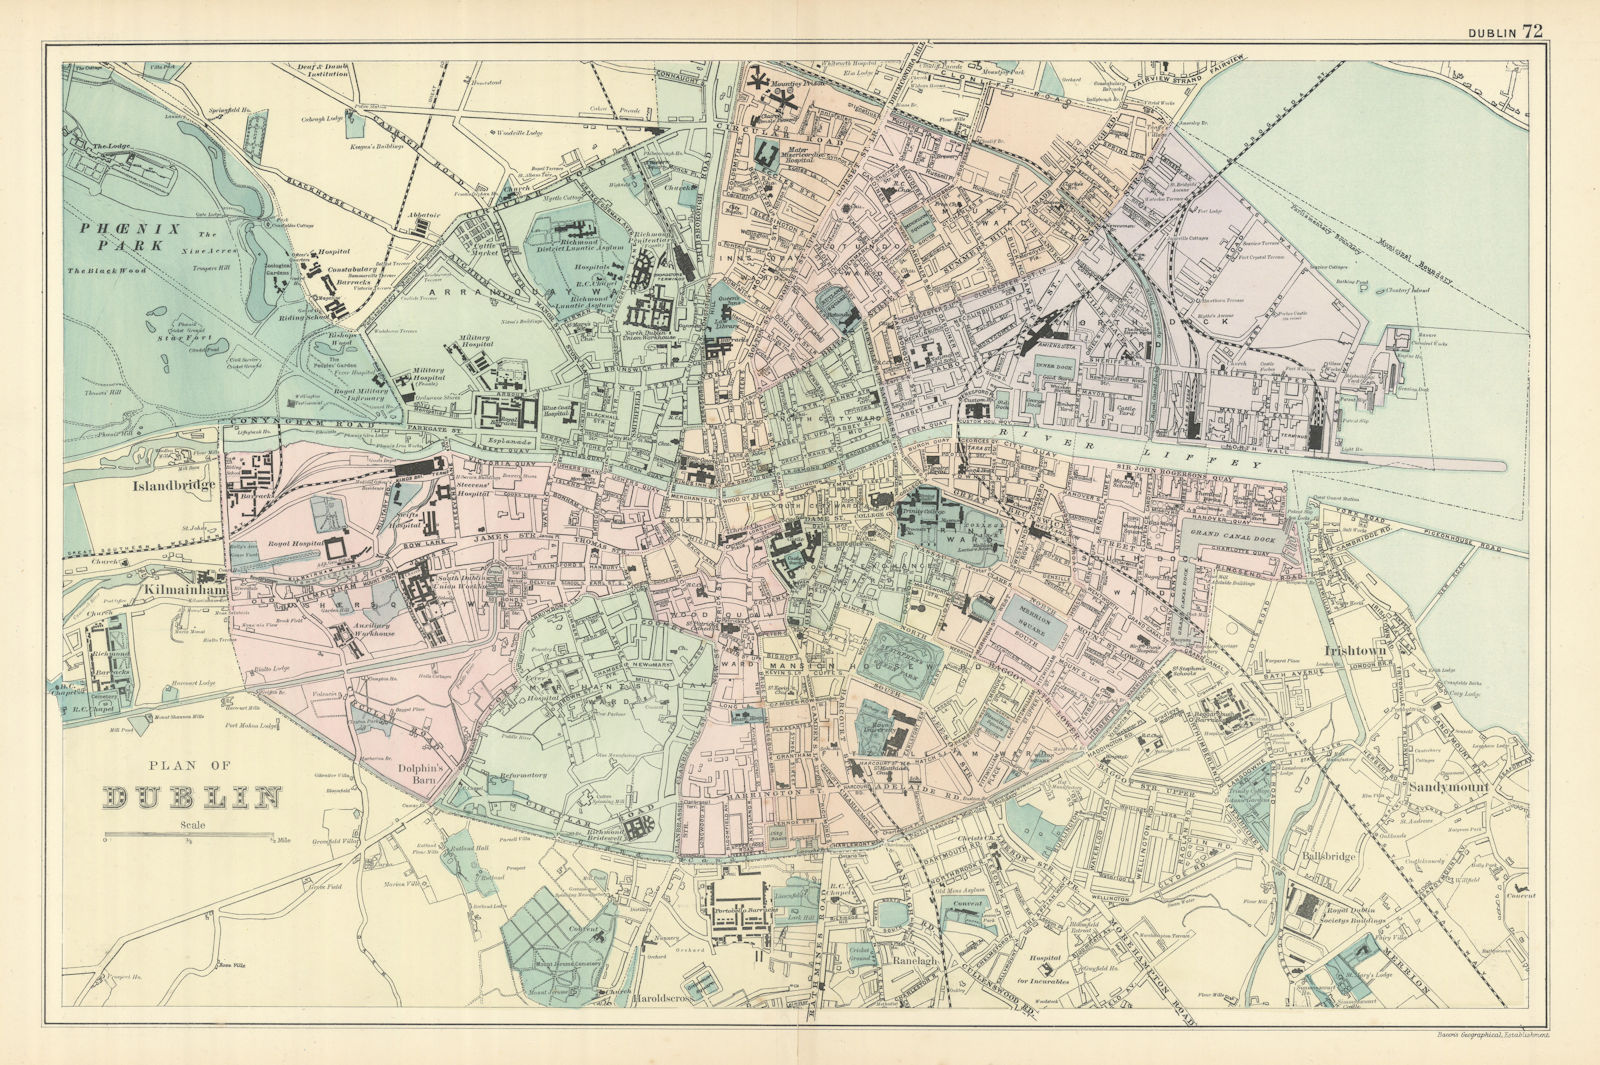 DUBLIN antique town city plan by GW BACON Ireland 1898 old map chart